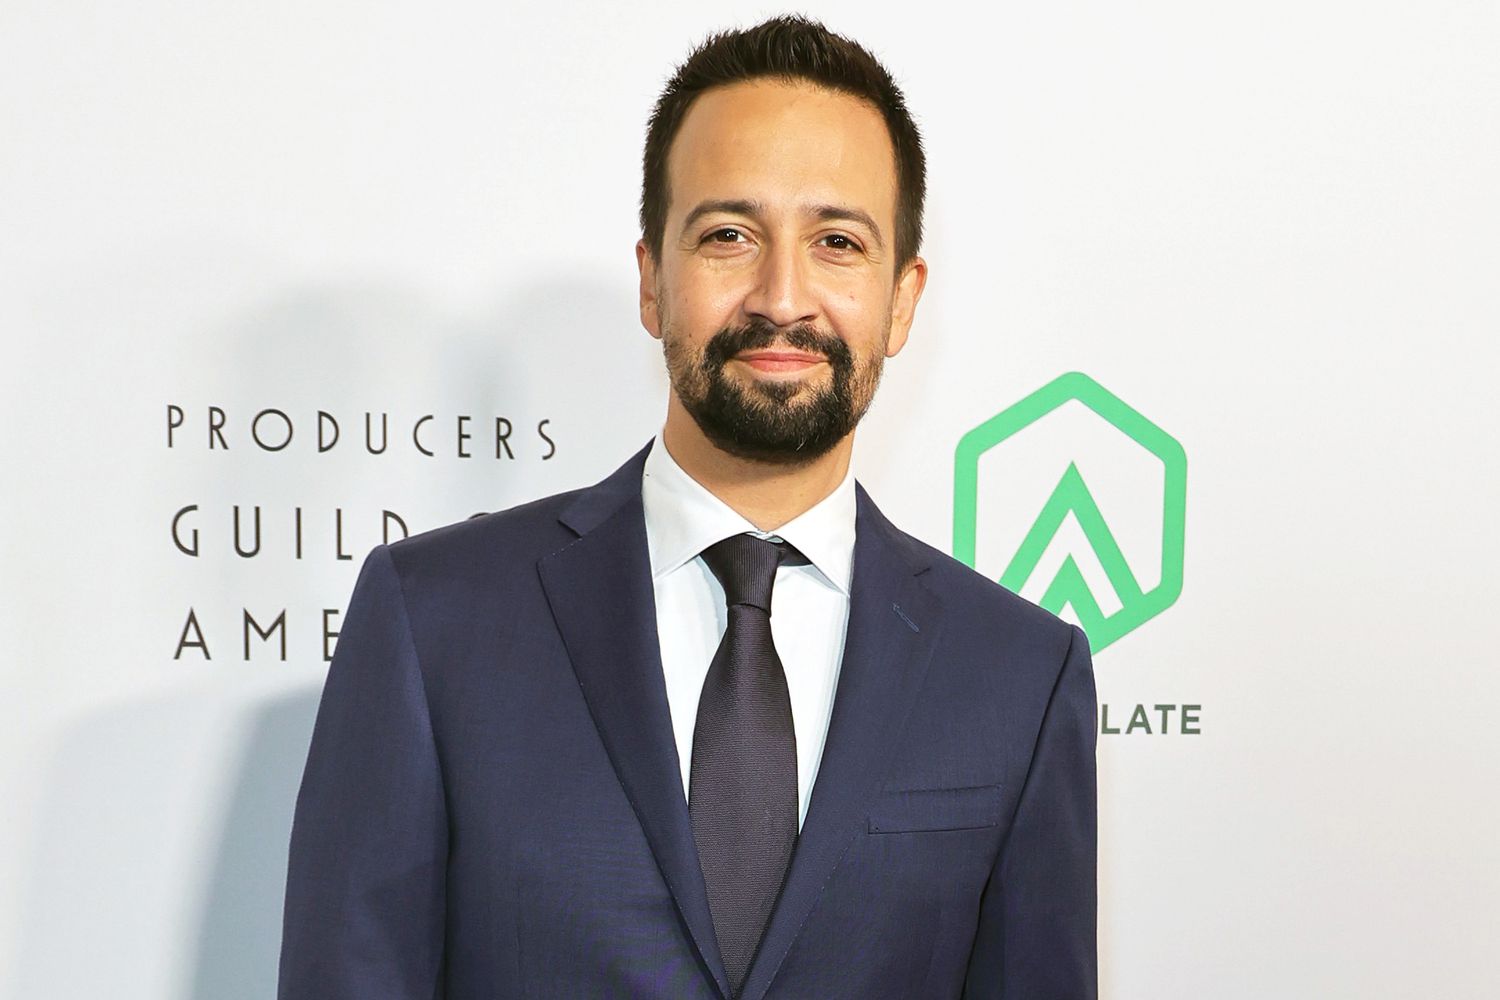 Lin-Manuel Miranda attends the 33rd Annual Producers Guild Awards at Fairmont Century Plaza on March 19, 2022 in Los Angeles, California.